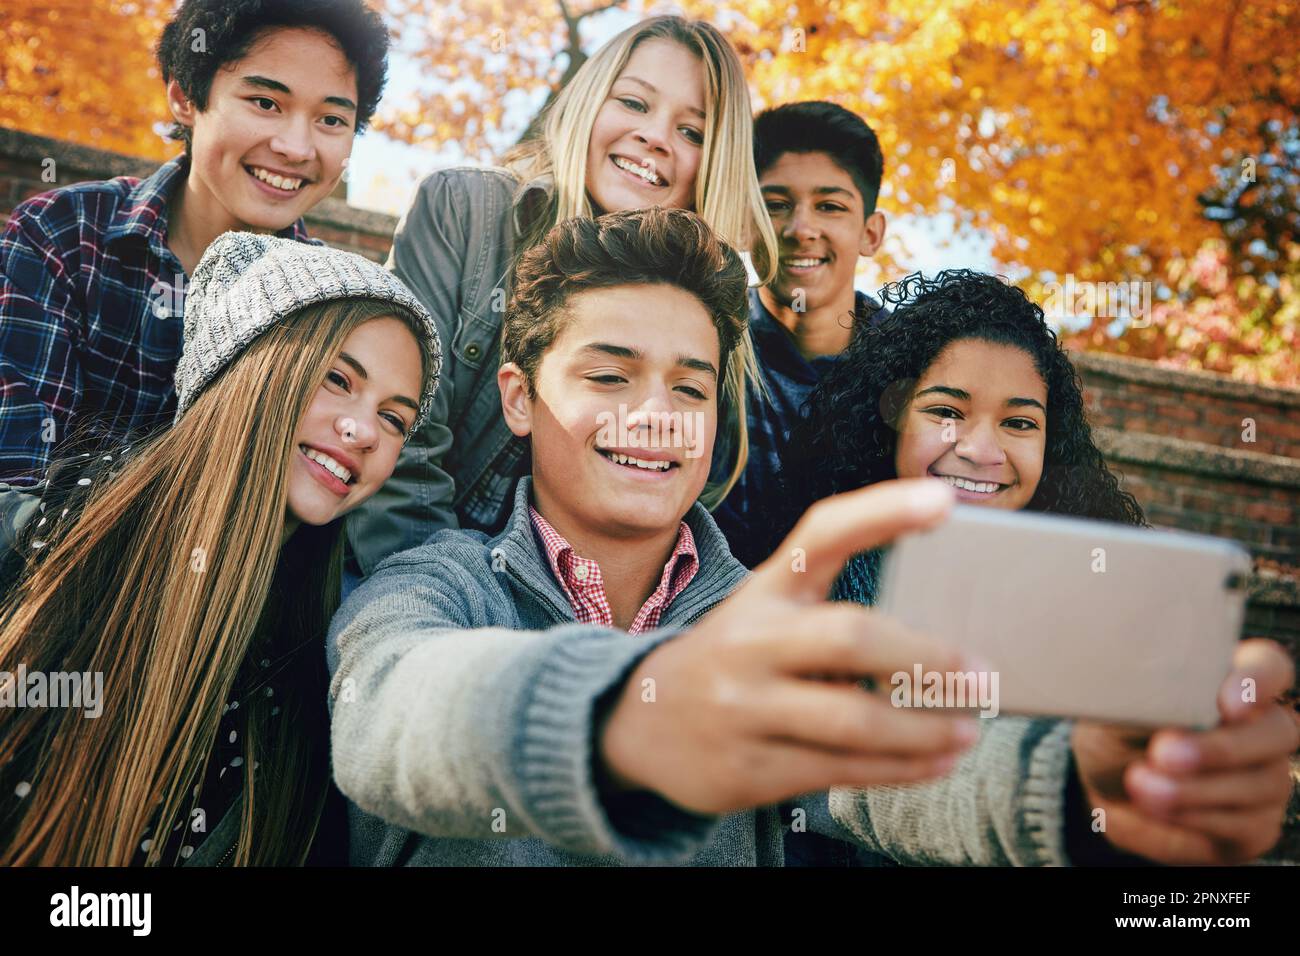 Selfie with friends. Friendly smiling teenagers making group photo